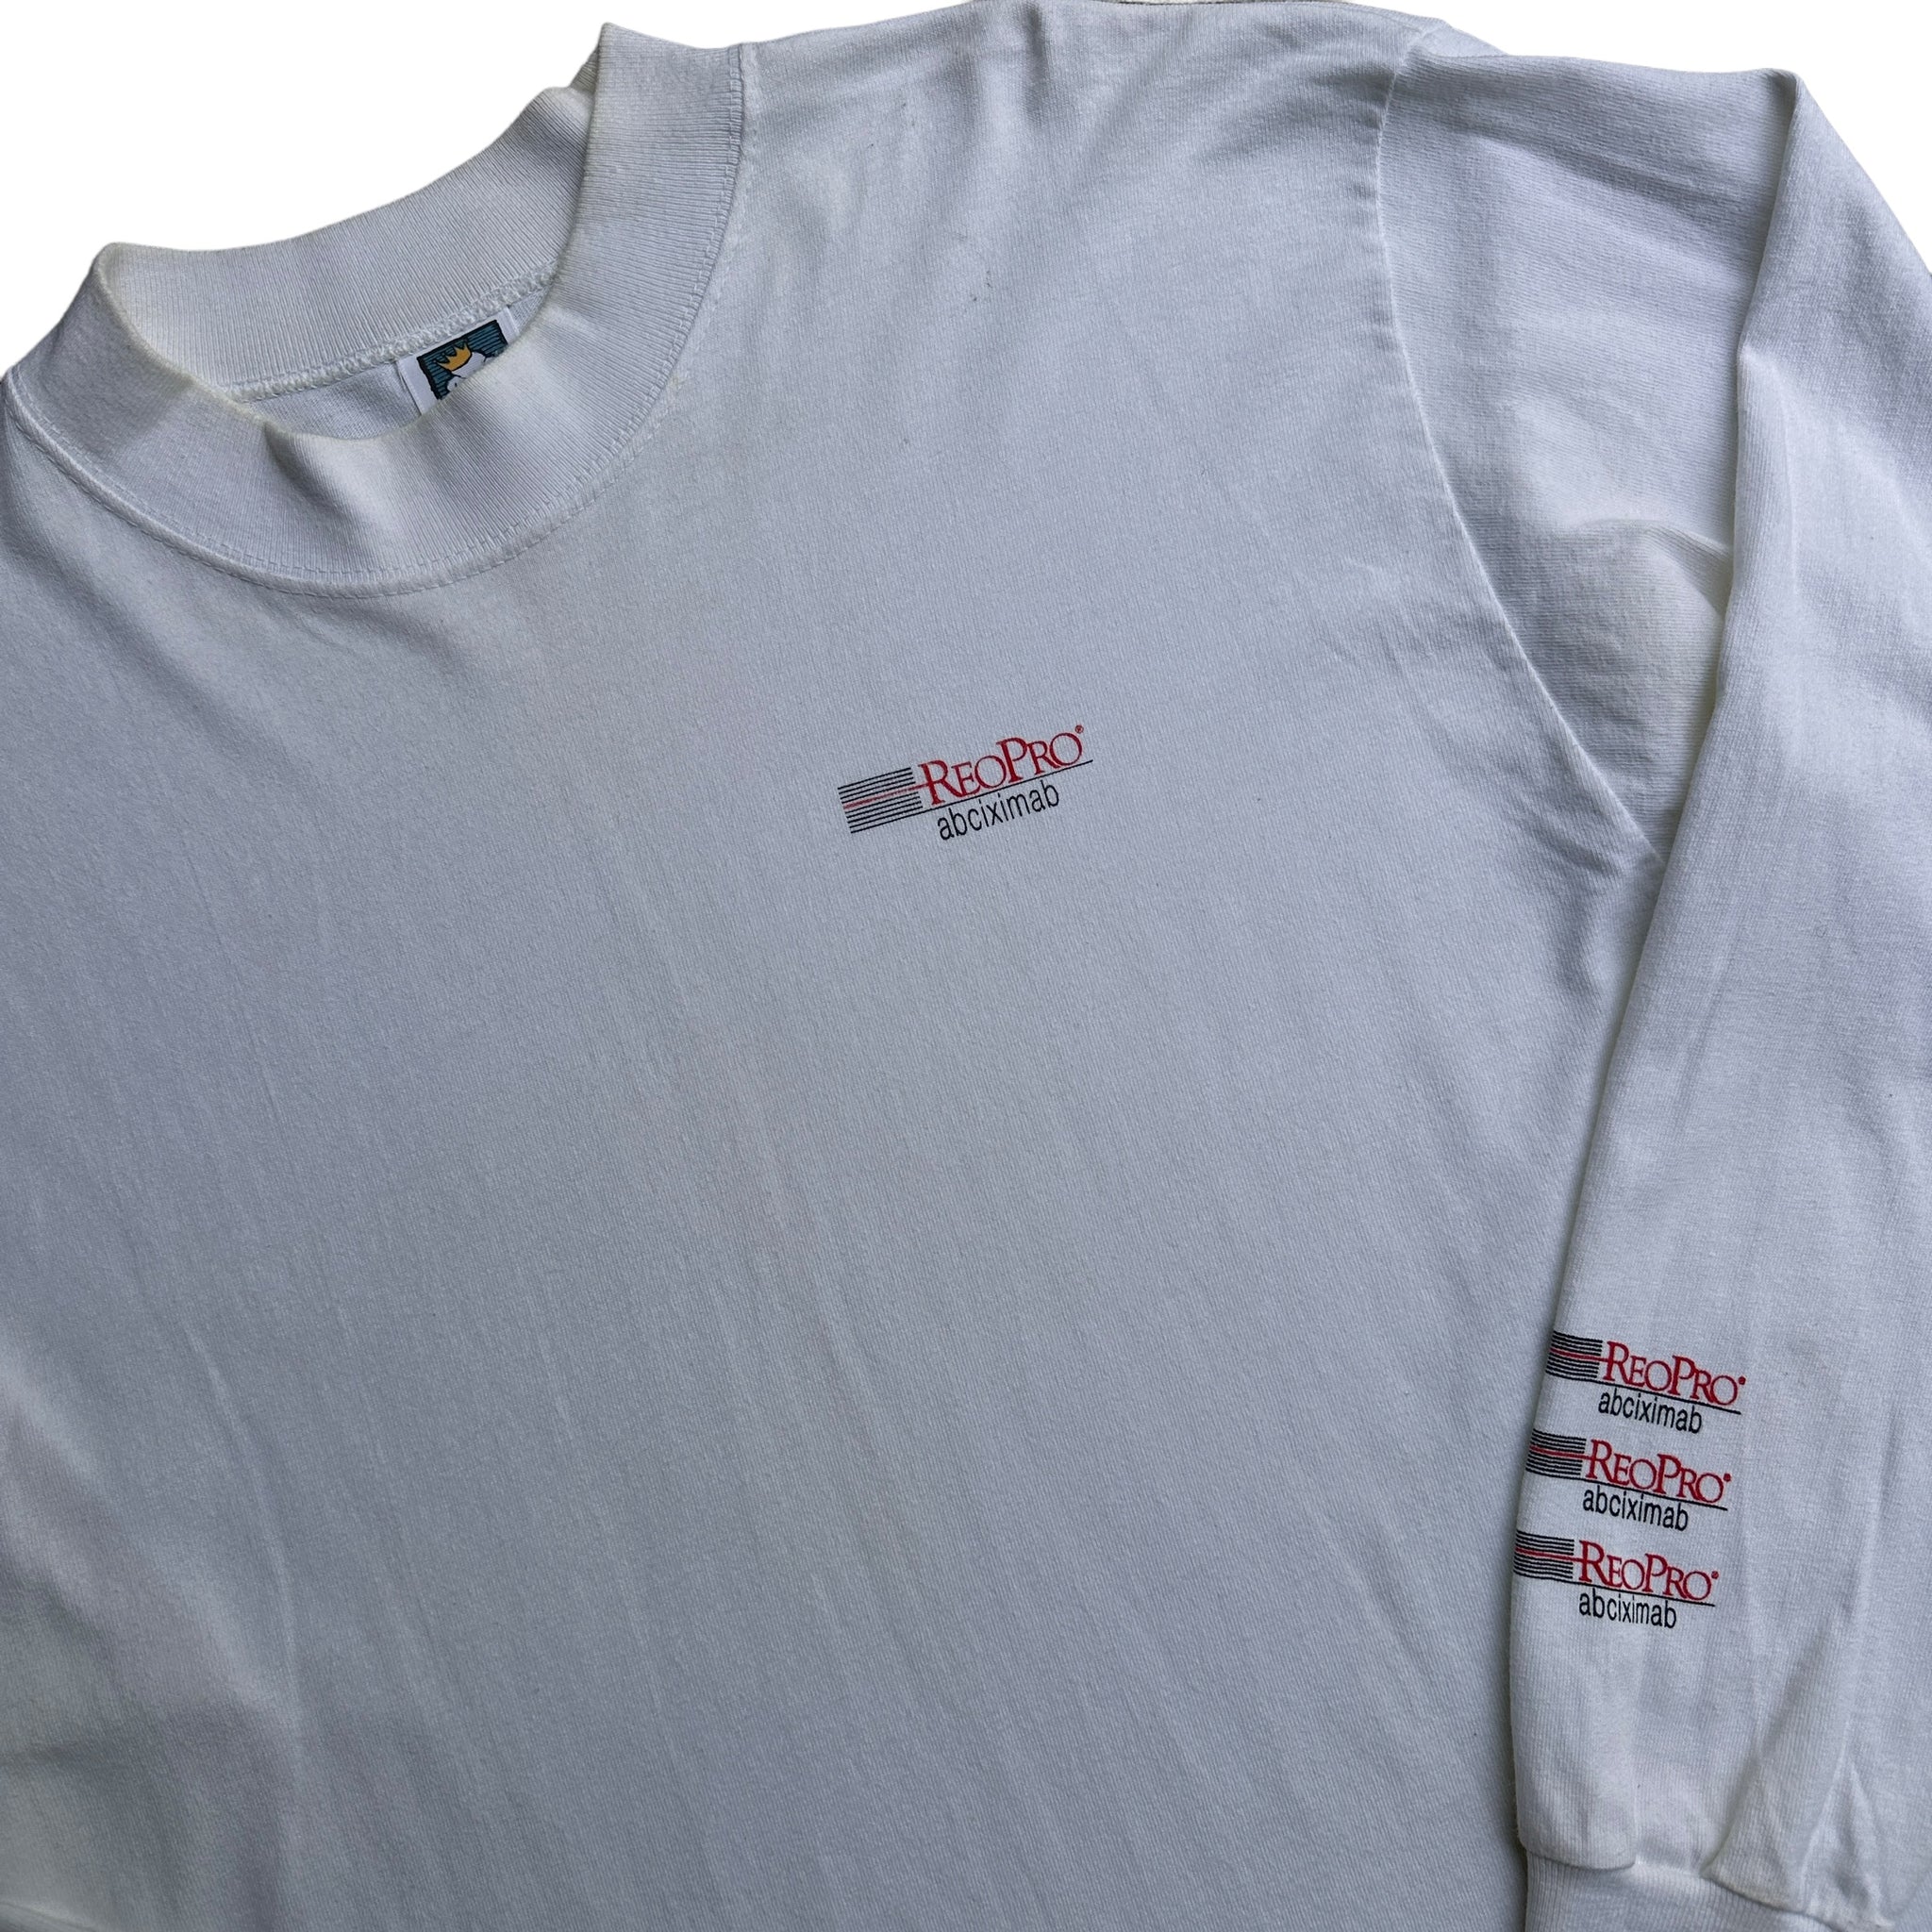 90s REOPRO® abciximab long sleeve XL